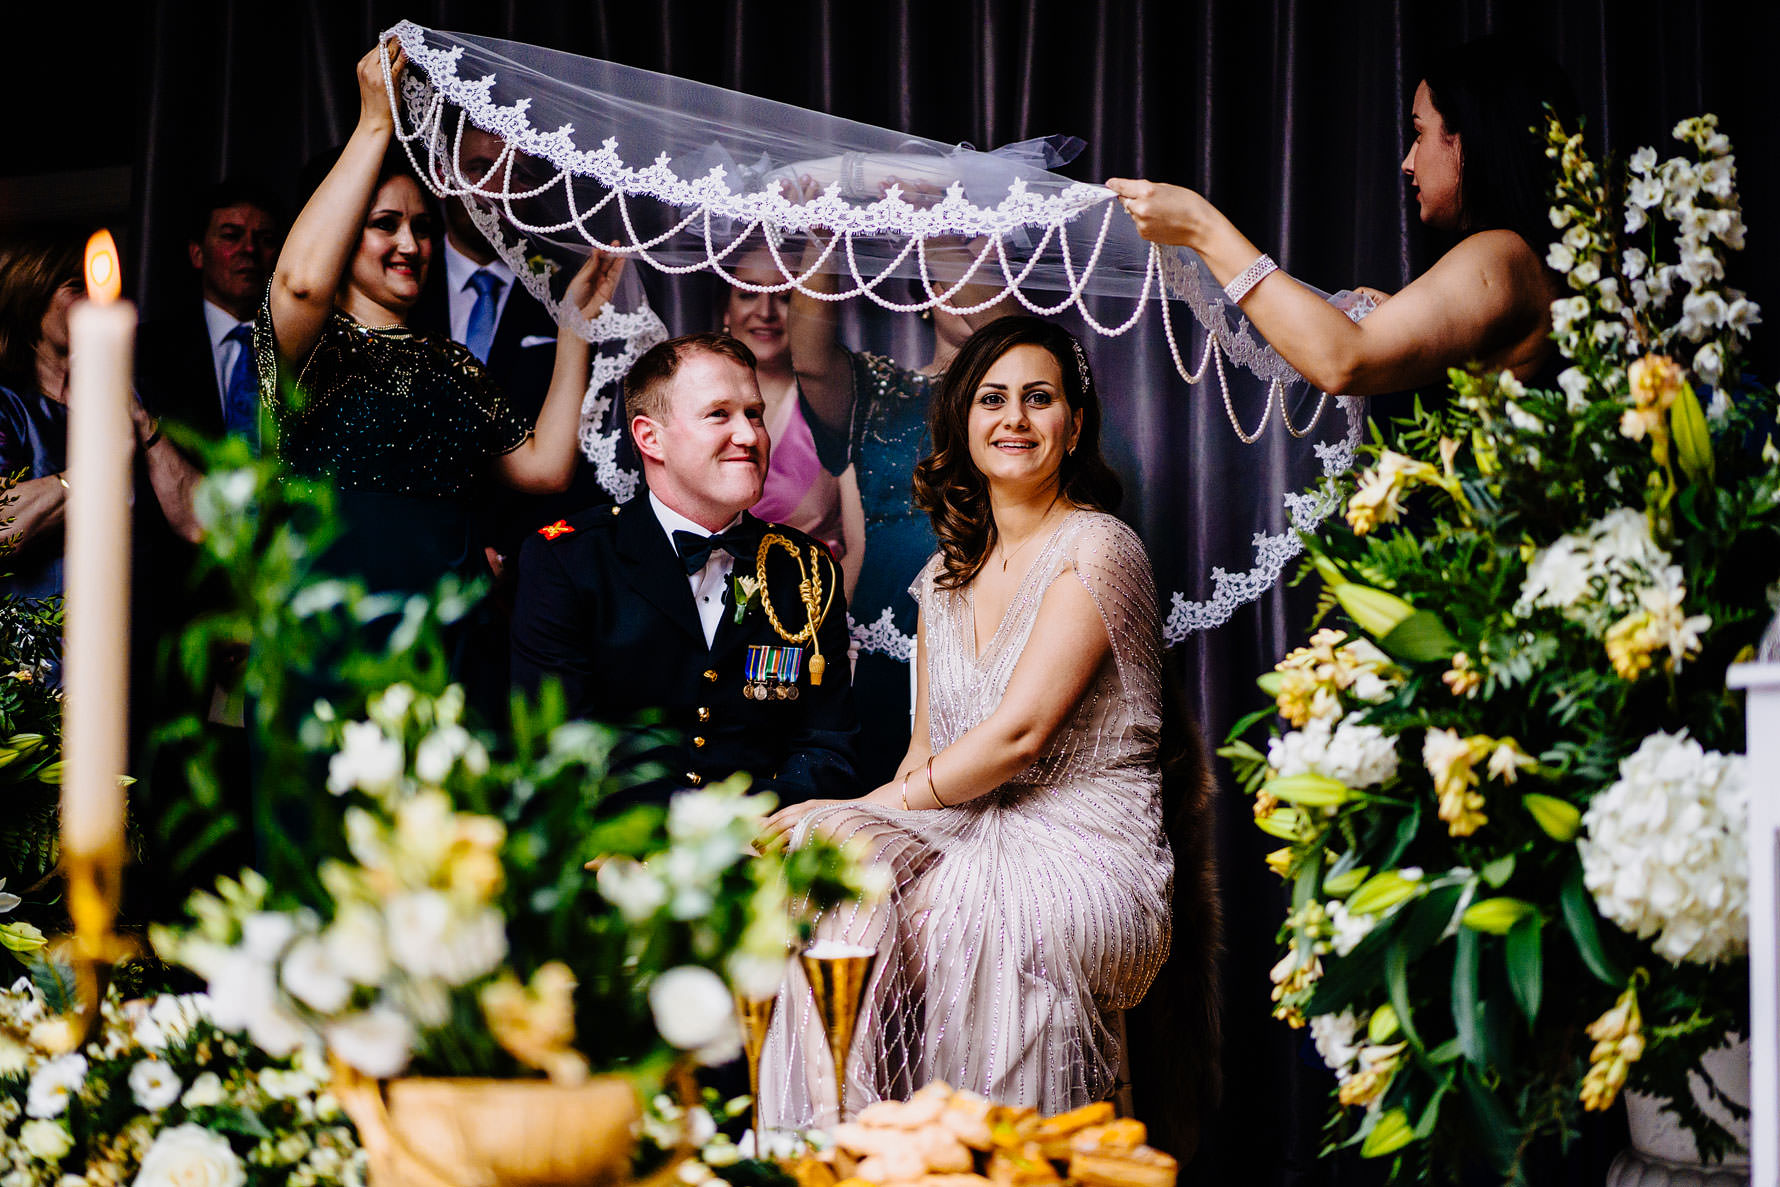 Iranian wedding ceremony by Elliot w patching photography